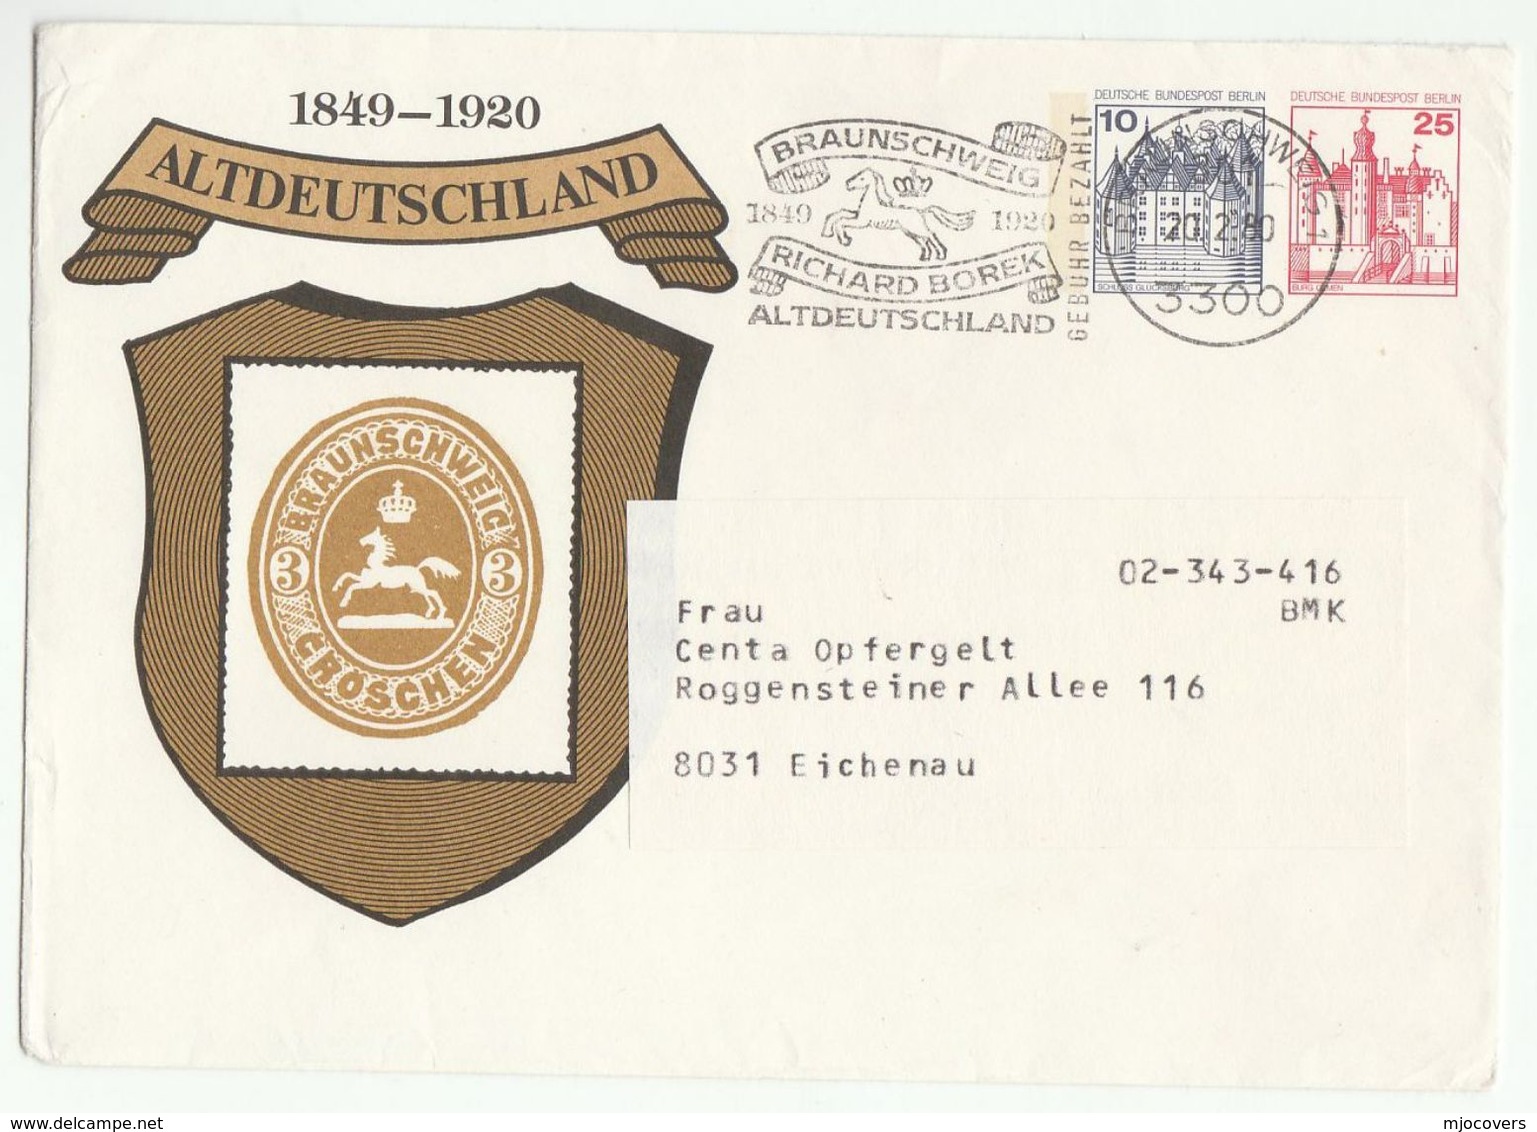 1980 Special  10+25pf POSTAL STATIONERY COVER Illus ALTDEUTSCHLAND BRAUNSCHWEIG 1849 STAMP Anniv, Germany Uprated Horse - Private Covers - Used